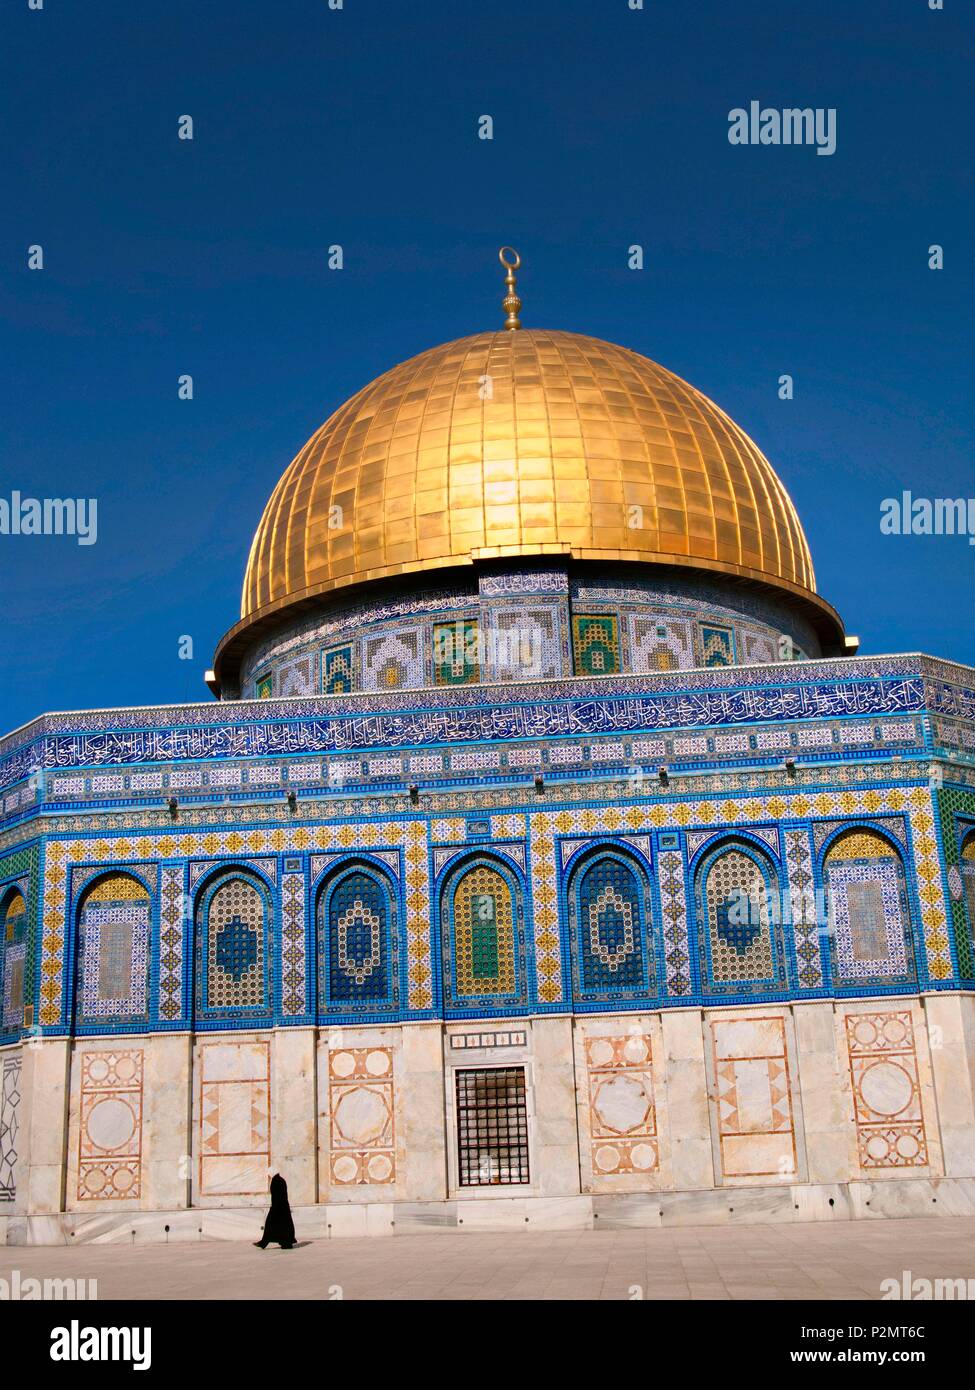 Israel, Palestine, Jerusalem, Dome of the Rock, a man walks in front of the Dome of the Rock, a sacred place of Islam where the Al-Aqsa mosque also stands Stock Photo